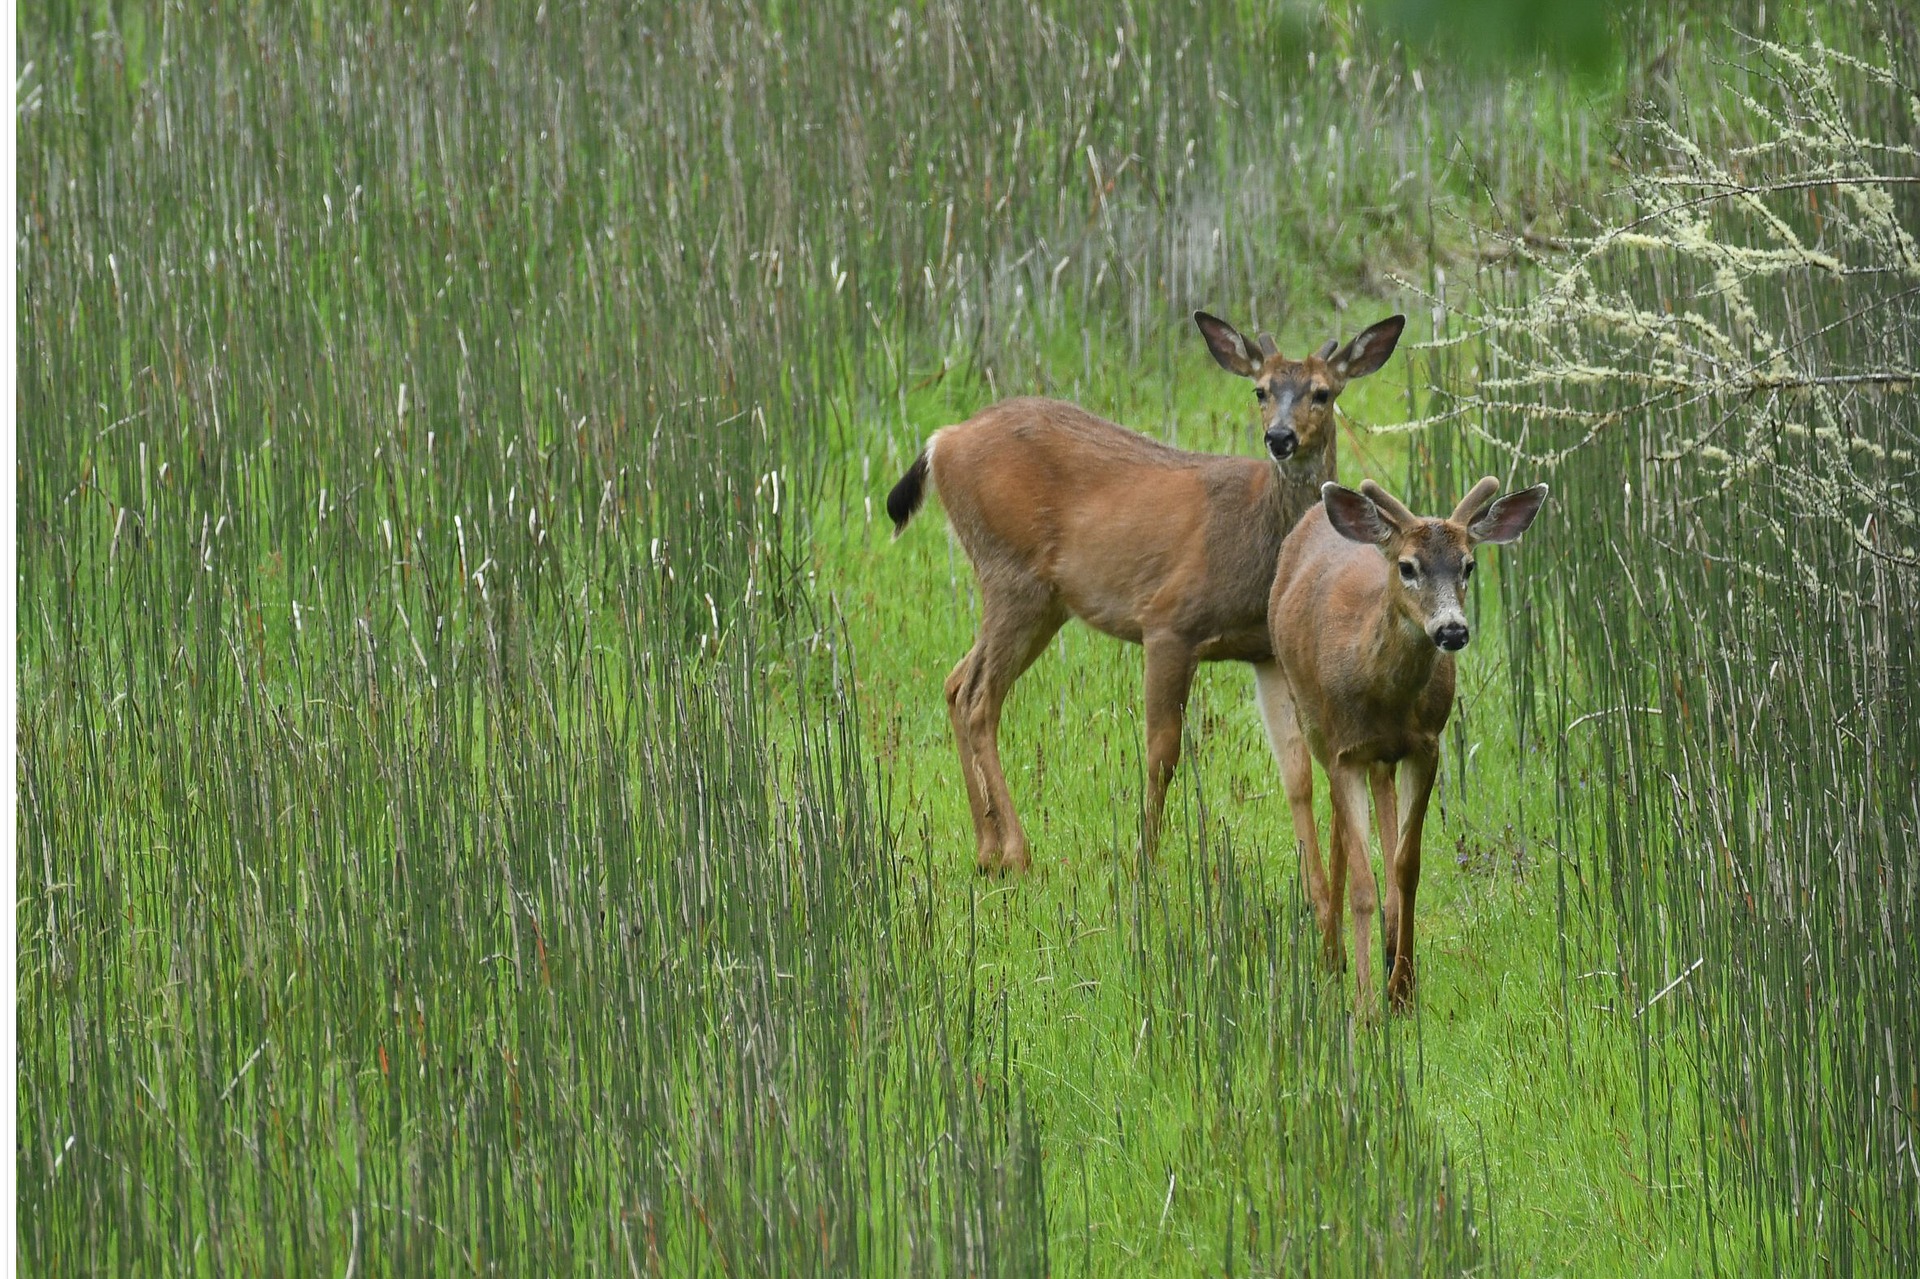 free-ranging deer were euthanized on the evening of July 26 in Ridgway Town...